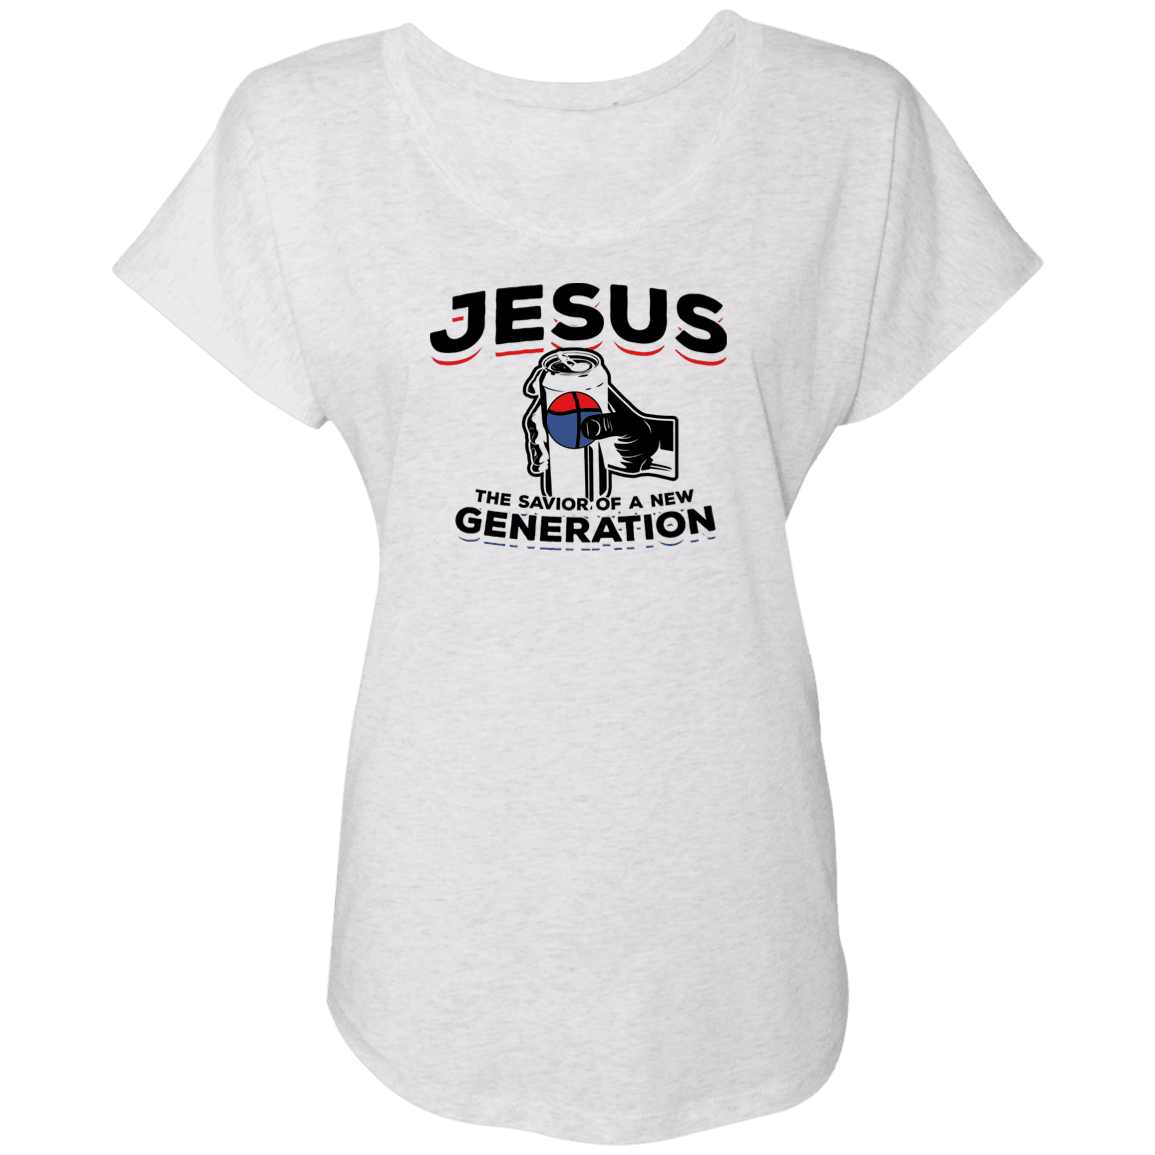 Designs by MyUtopia Shout Out:Jesus Savior of New Generation Ladies' Triblend Dolman Shirt,X-Small / Heather White,Ladies T-Shirts